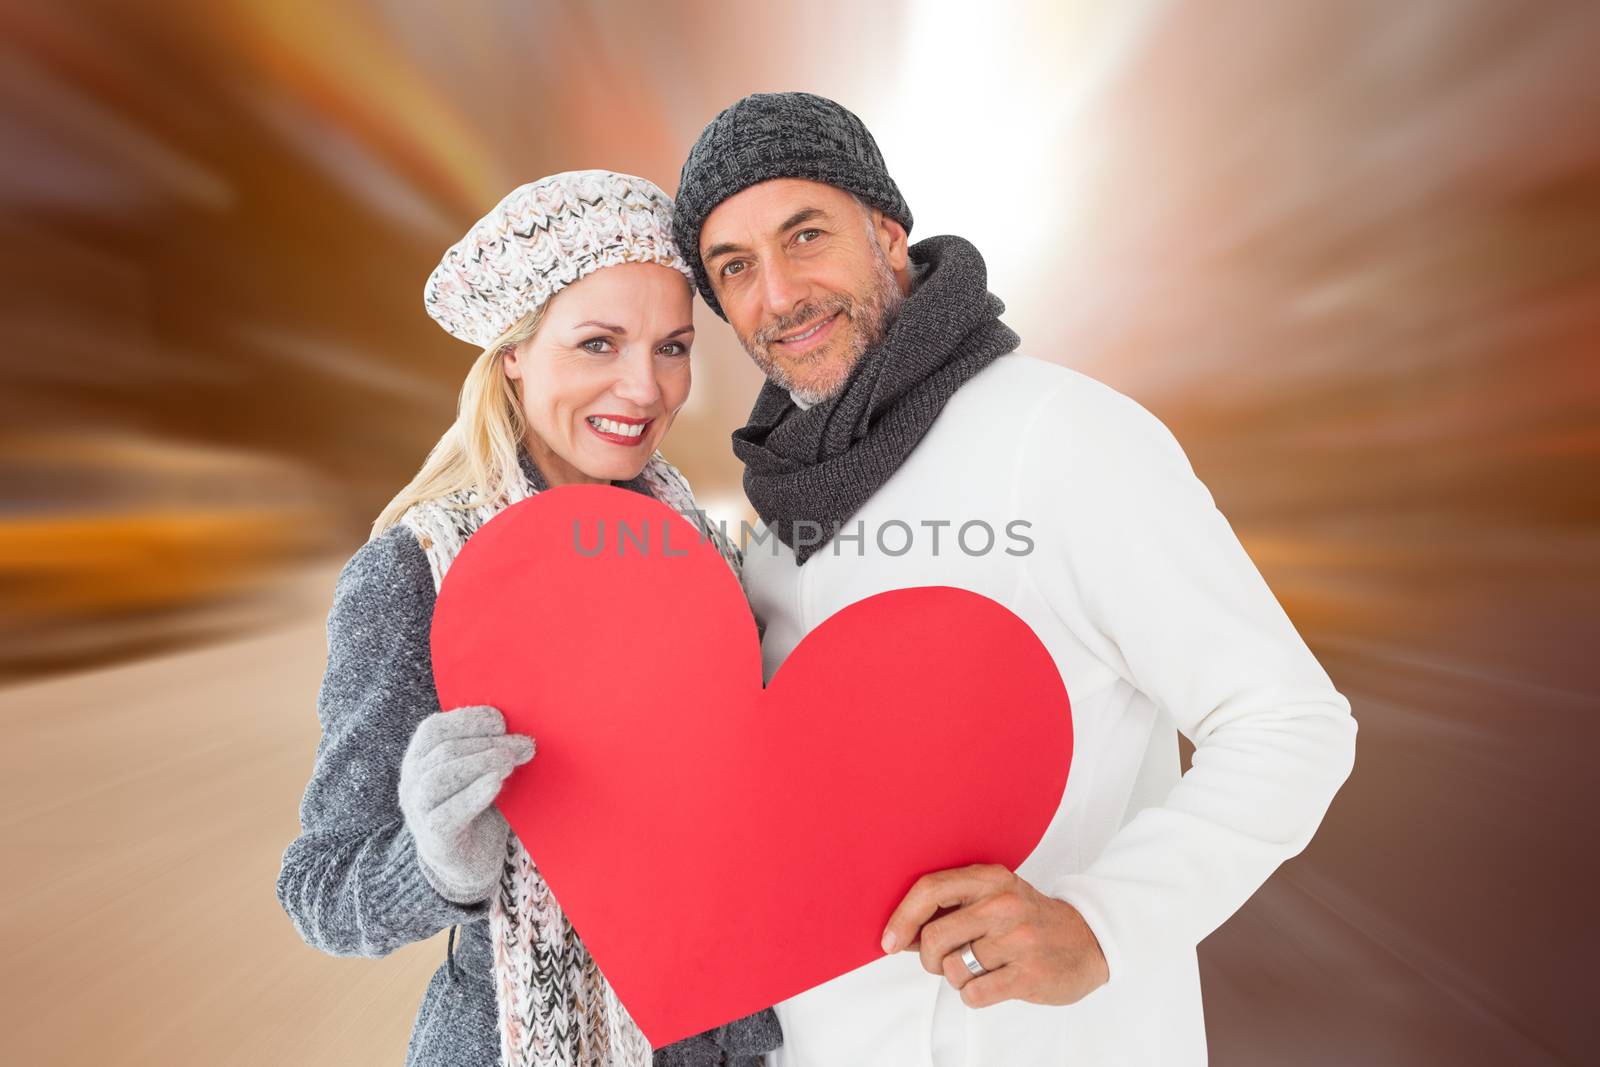 Smiling couple in winter fashion posing with heart shape against blurry new york street